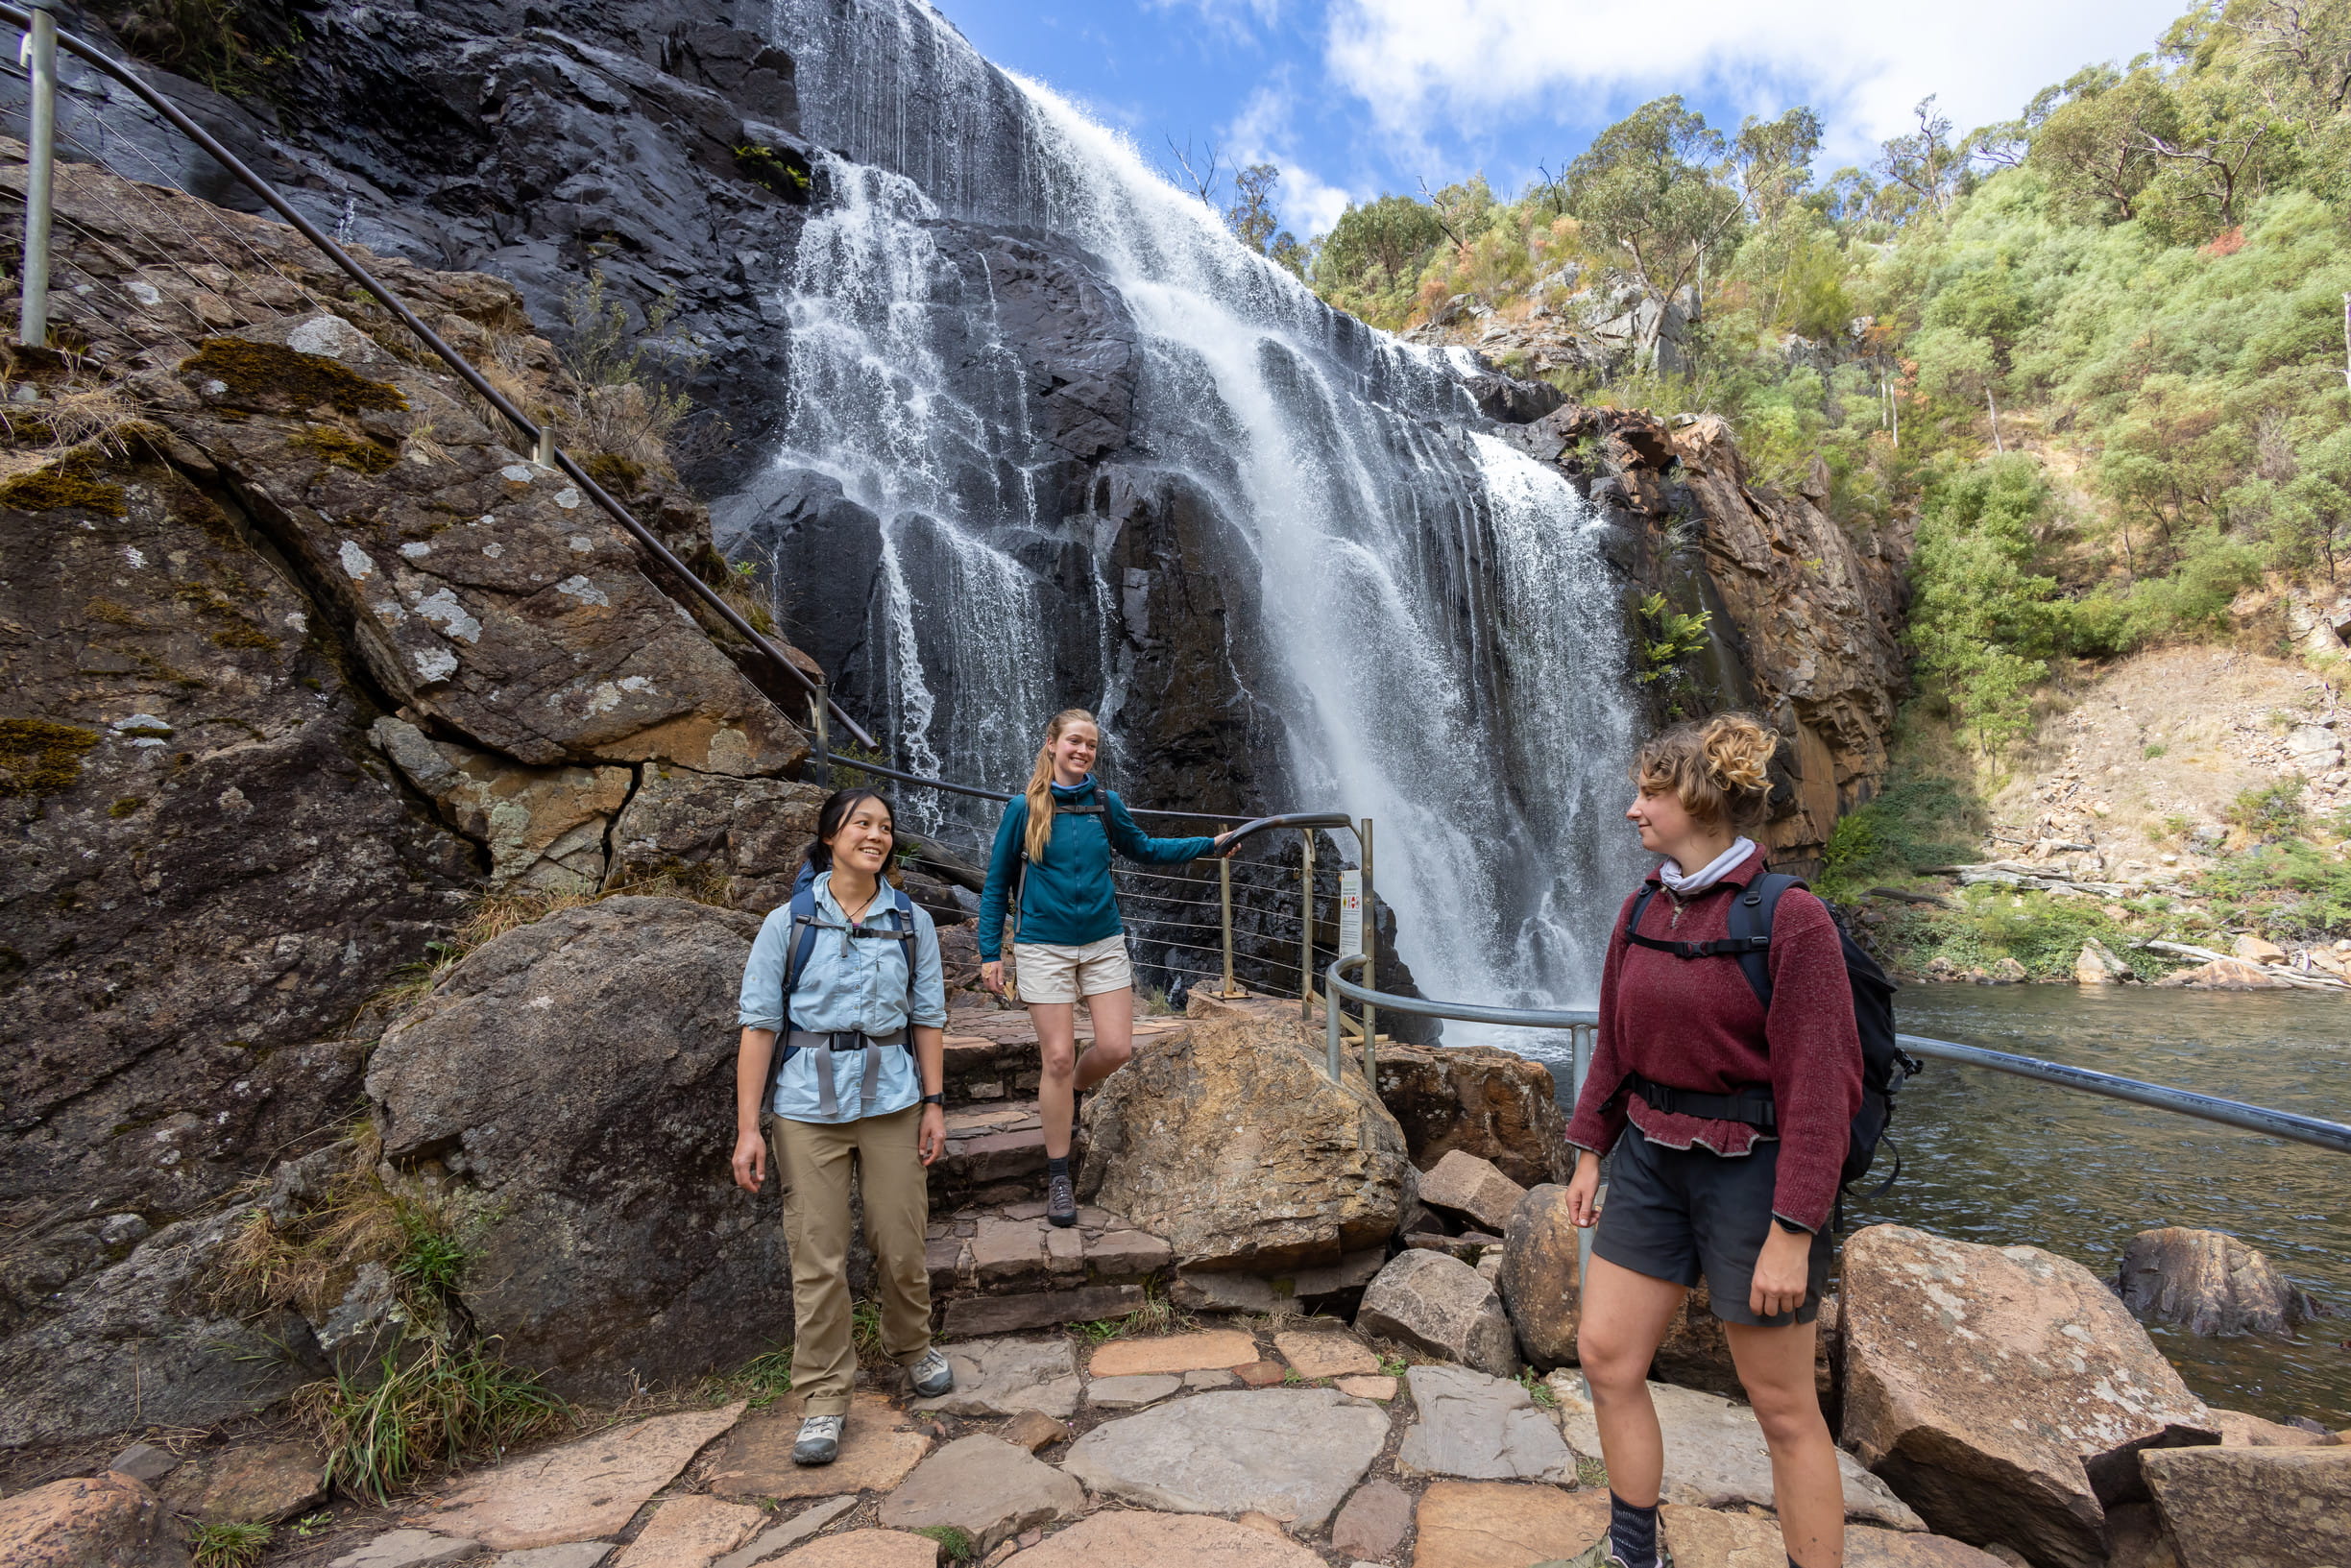 Three female walkers standing at viewing area on a track at the base of the waterfall, with the waterfall in the background